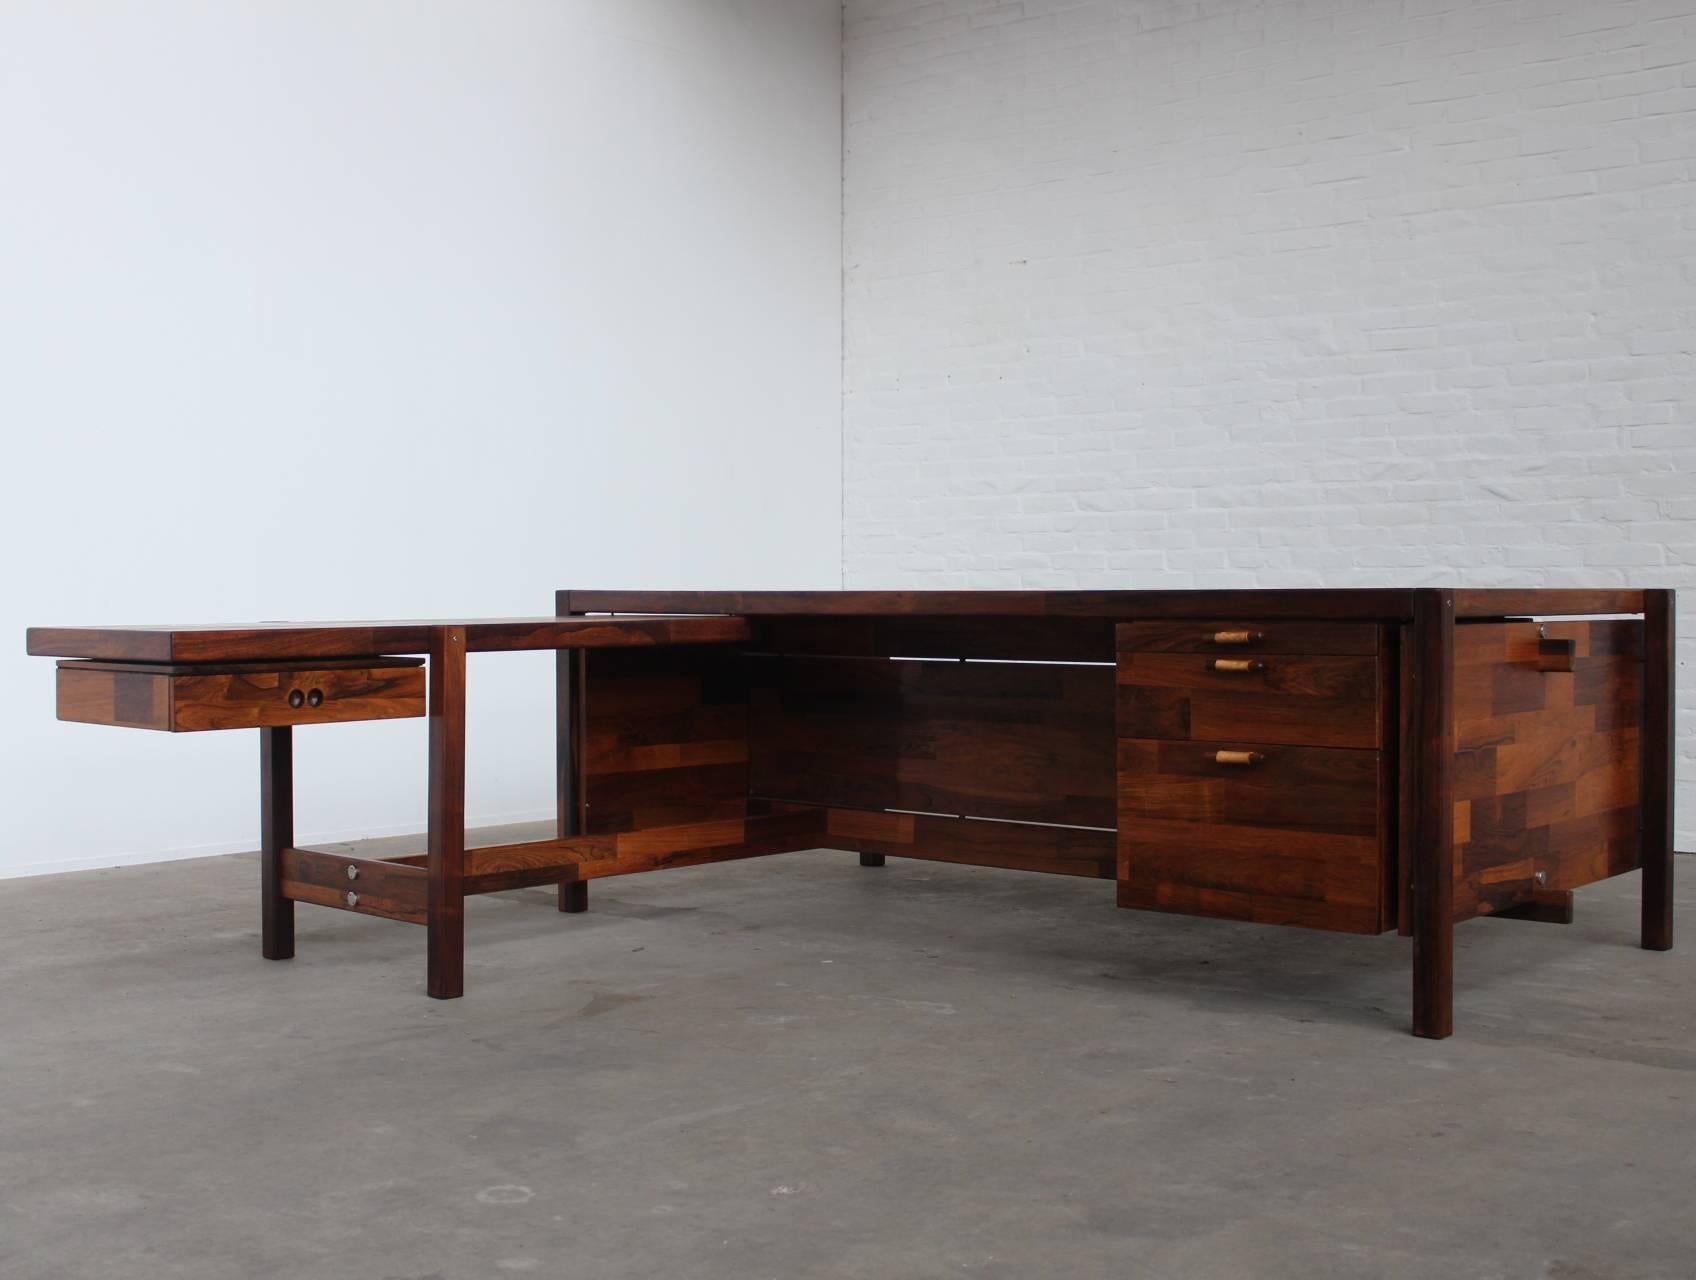 Astonishing large executive desk with return by the Brazilian designer Jorge Zalszupin manufactured by L'Atelier, São Paulo Brazil. Made out of the best selected rosewood / jacaranda veneer parts in combination with solid rosewood and has the